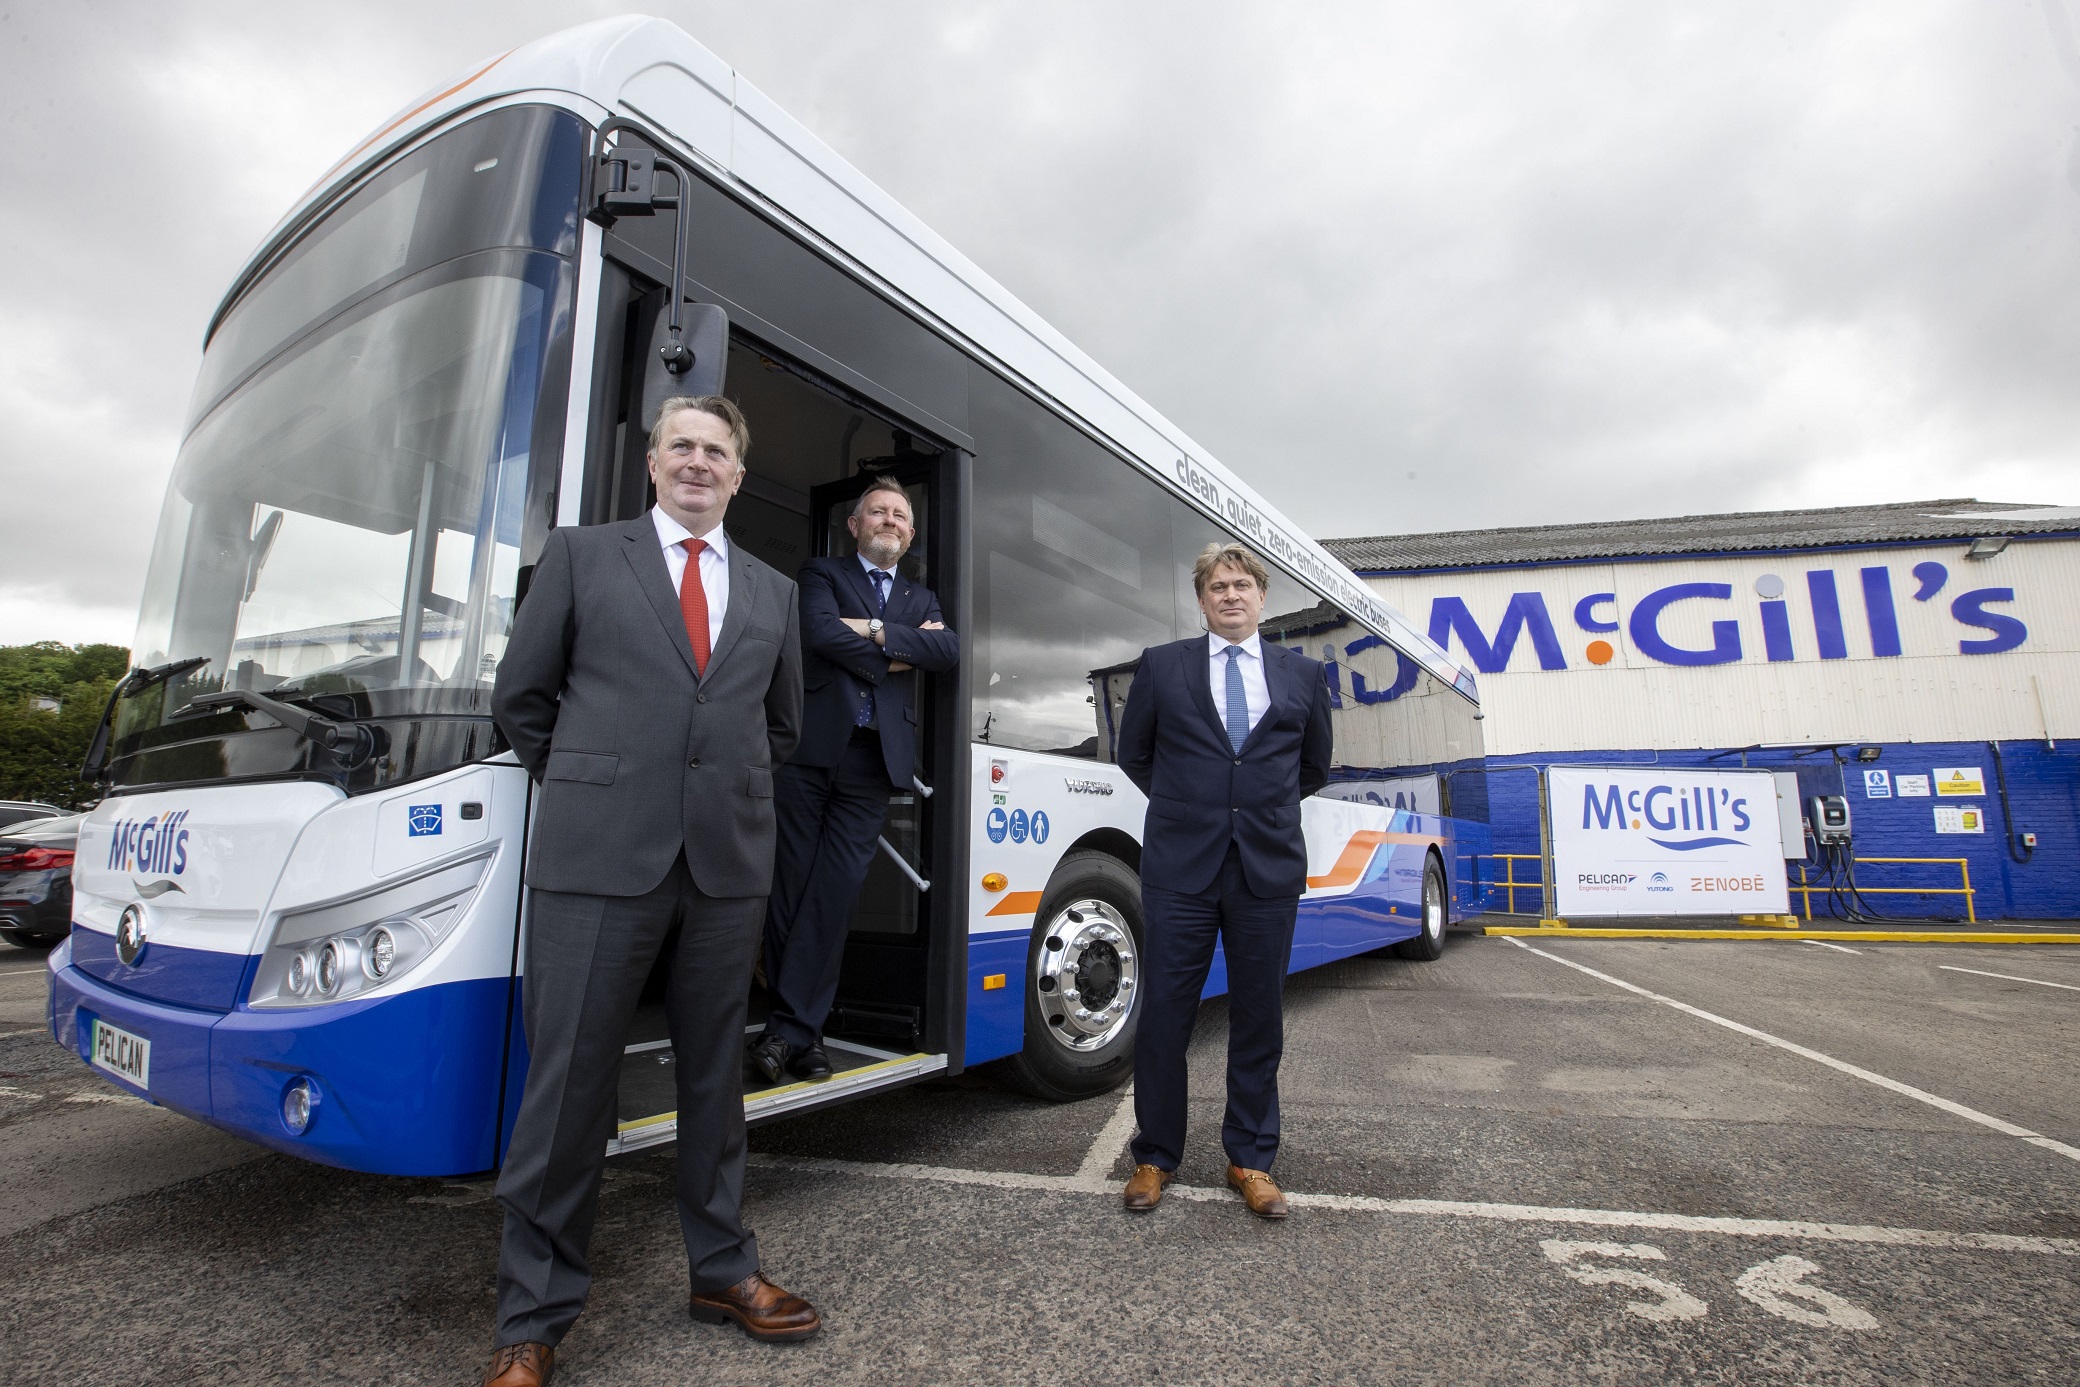 McGills Buses and First Glasgow agree city night bus network